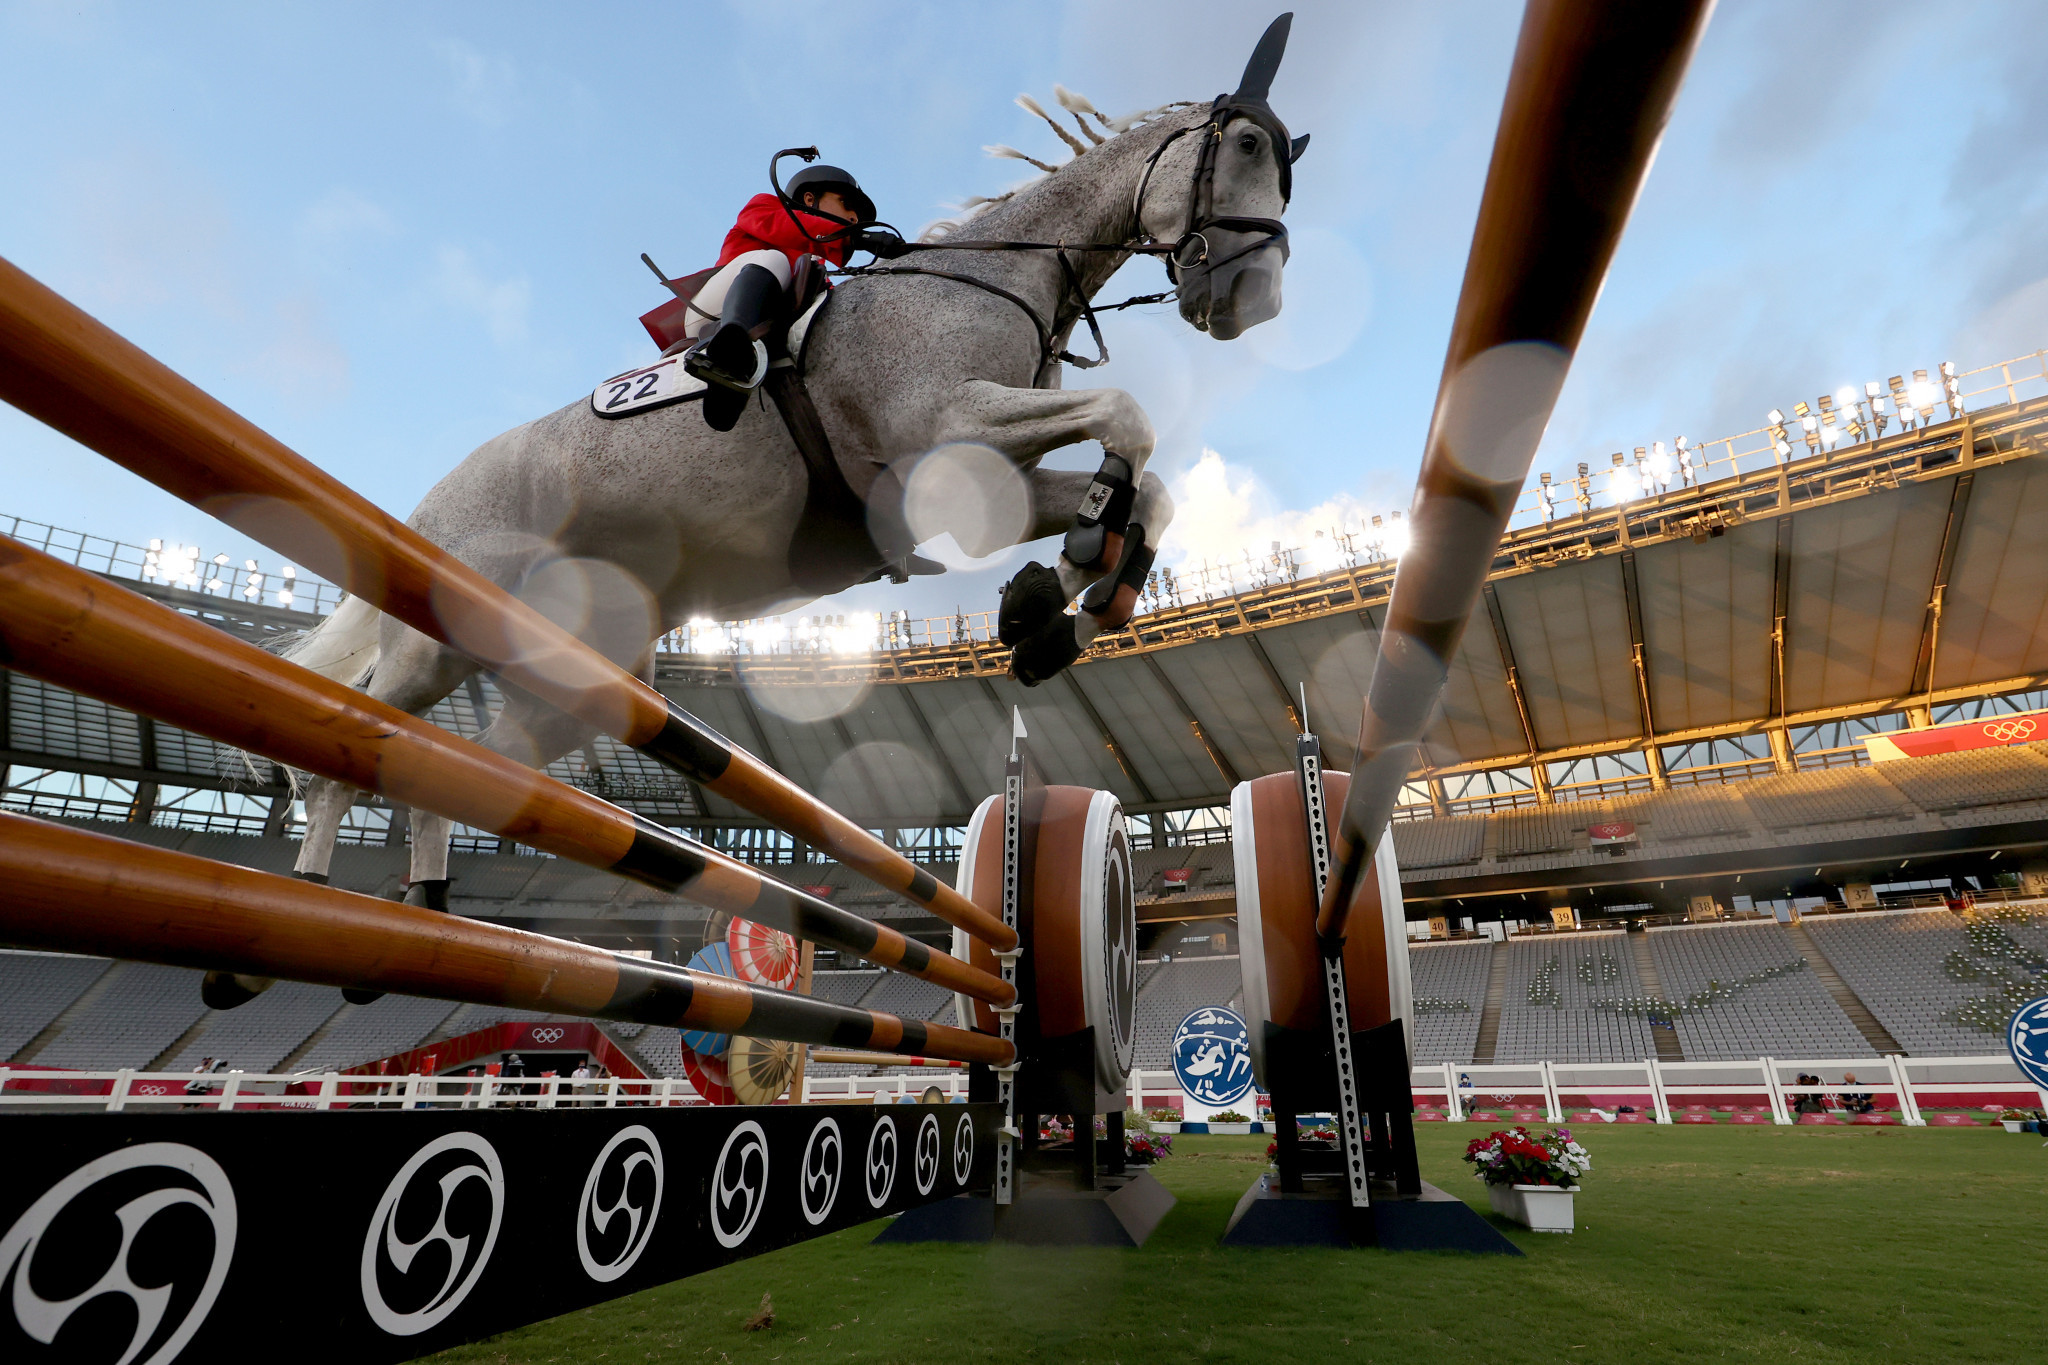 FEI officials are to work with modern pentathlon during the jumping phase in Paris ©Getty Images